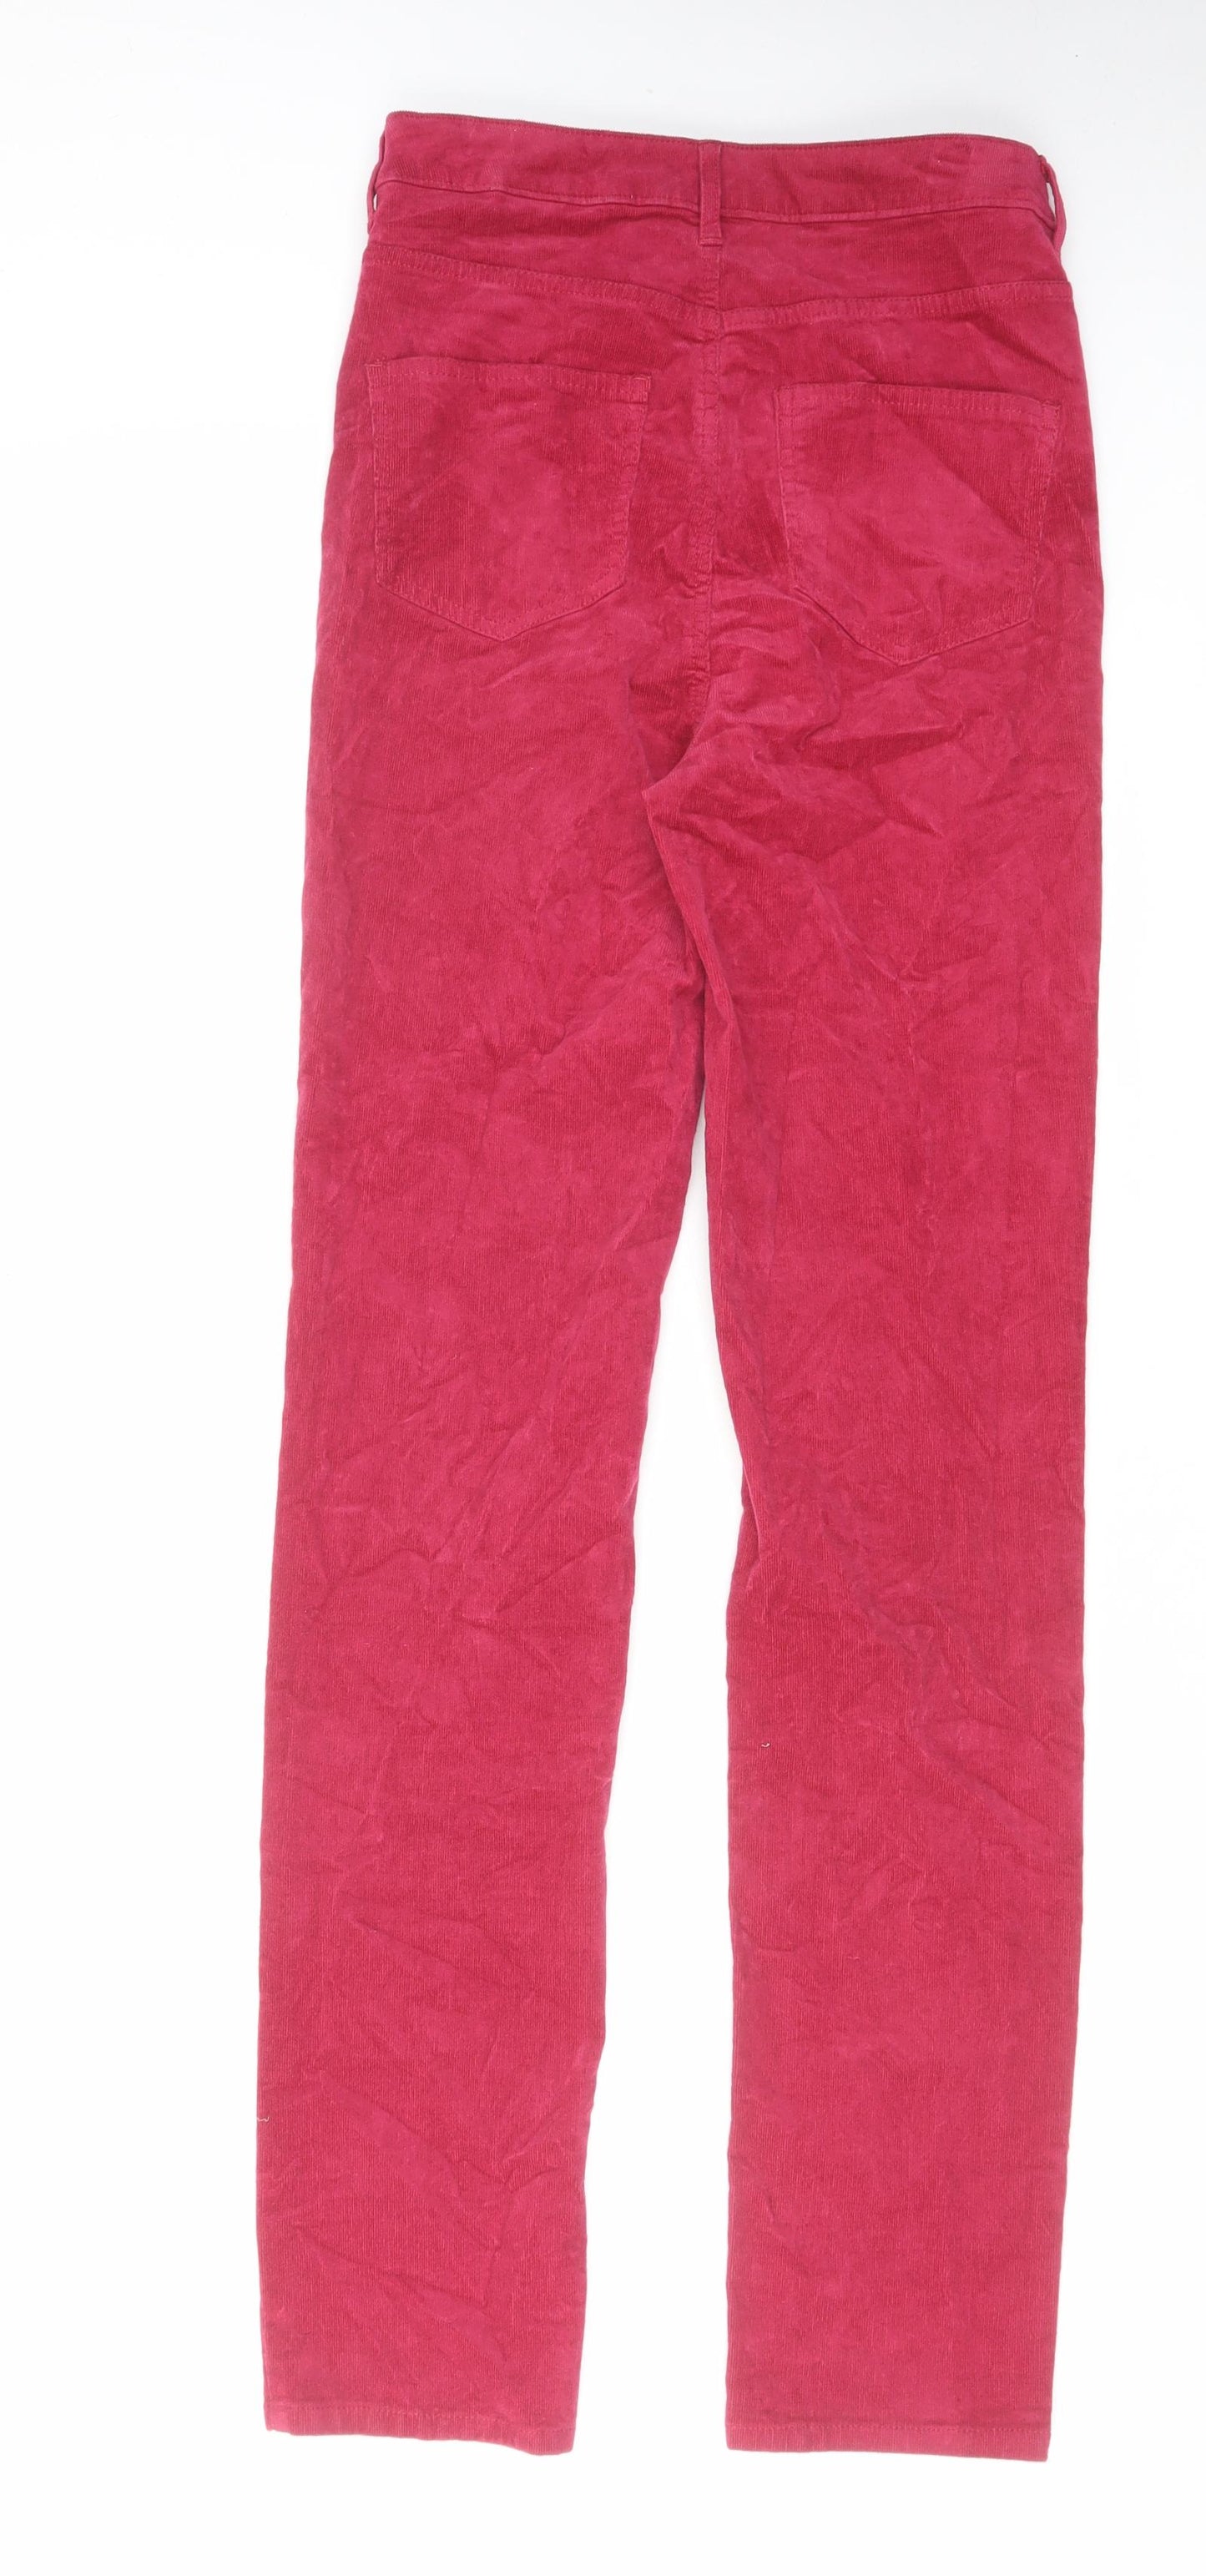 Marks and Spencer Womens Pink Cotton Trousers Size 8 L33 in Regular Zip